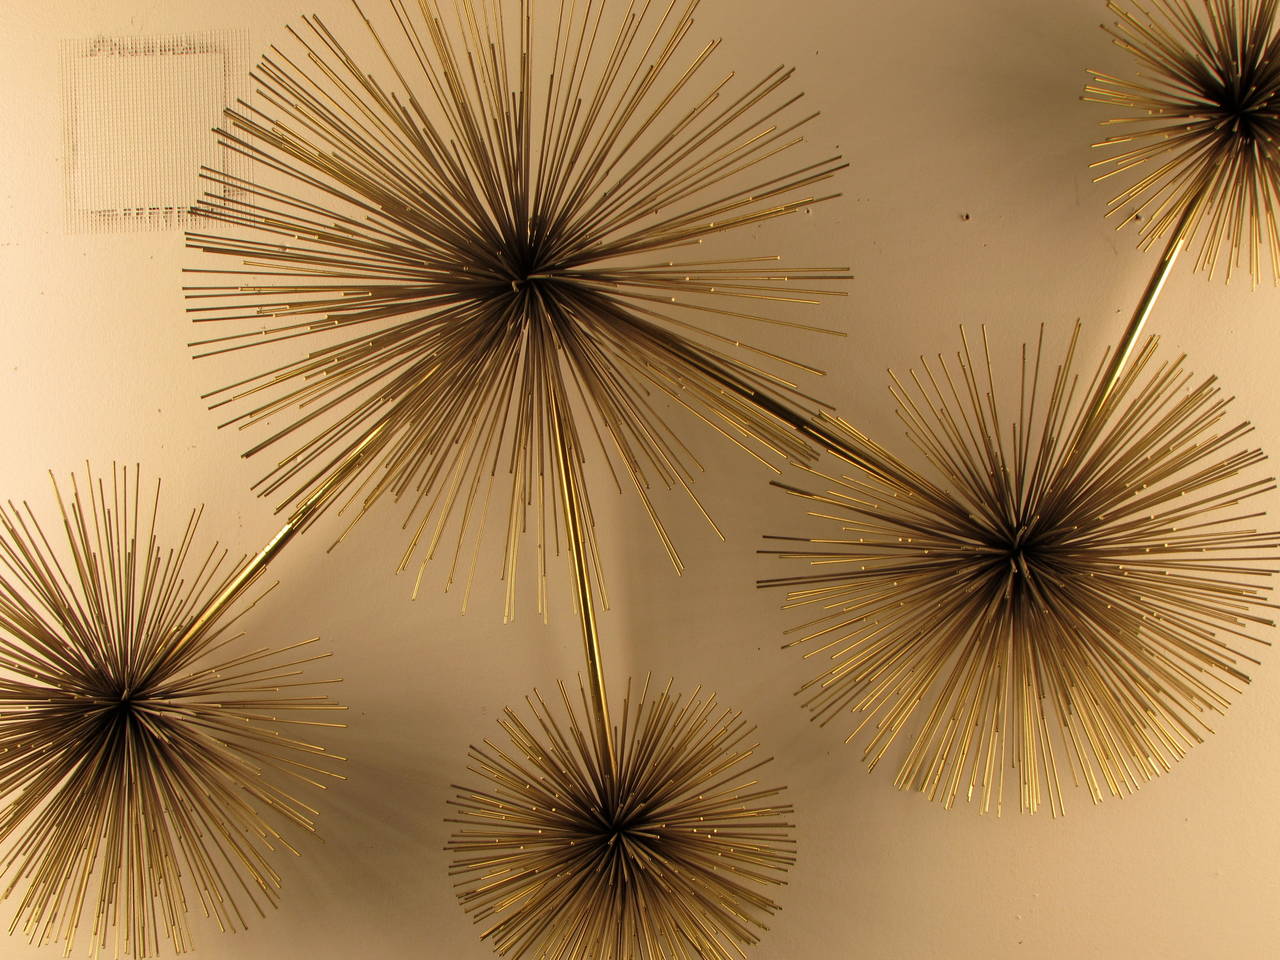 We are pleased to offer this large brass pom pom starburst wall sculpture by Curtis Jere, USA, 1979. It is a very large piece that would look great over a buffet or sofa. The condition is excellent with no damage or losses. A remnant of the C. Jere